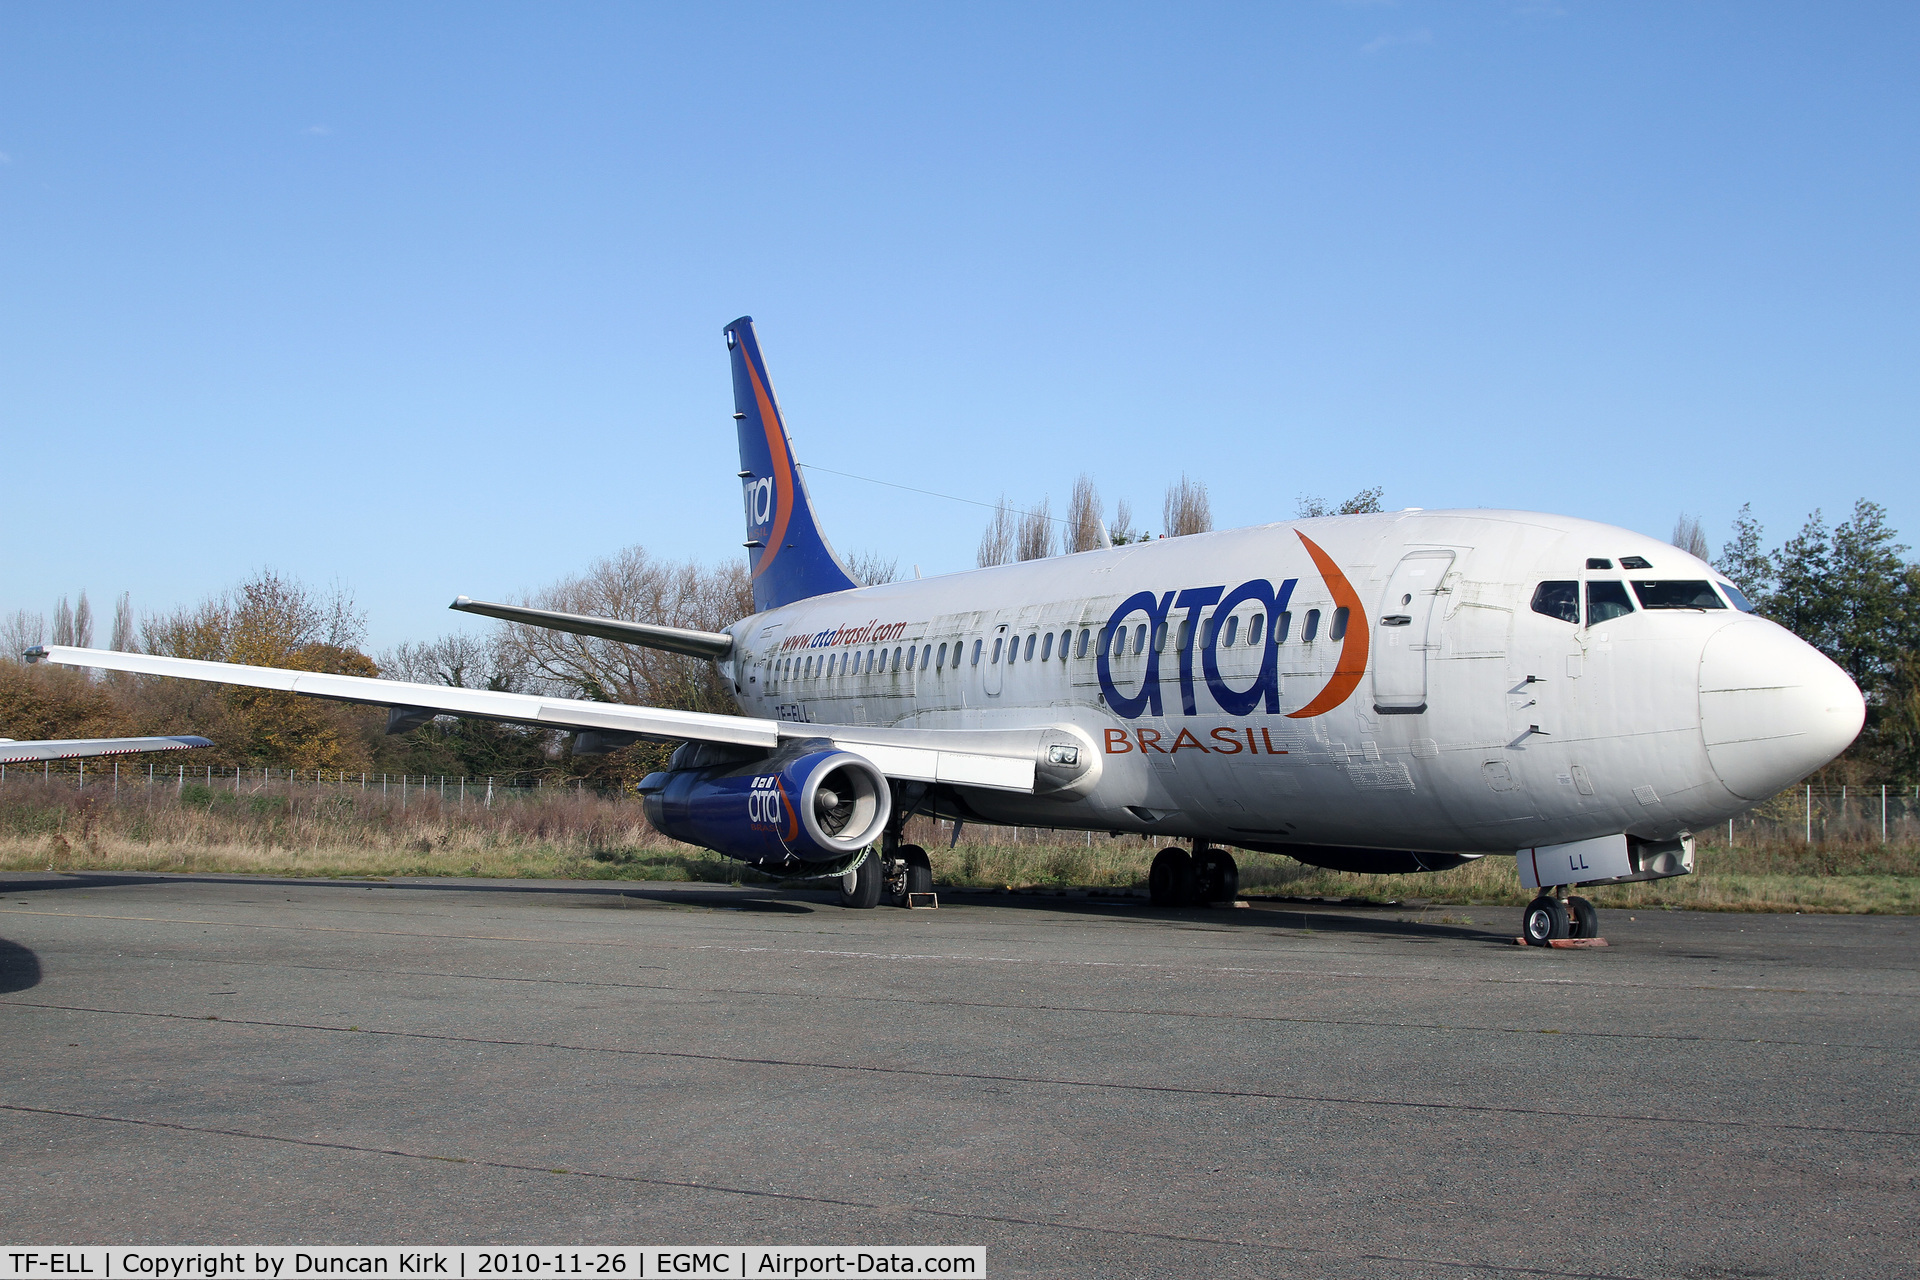 TF-ELL, 1969 Boeing 737-210C C/N 20138, Destined for the scrapping and resting on the end of former Runway 15